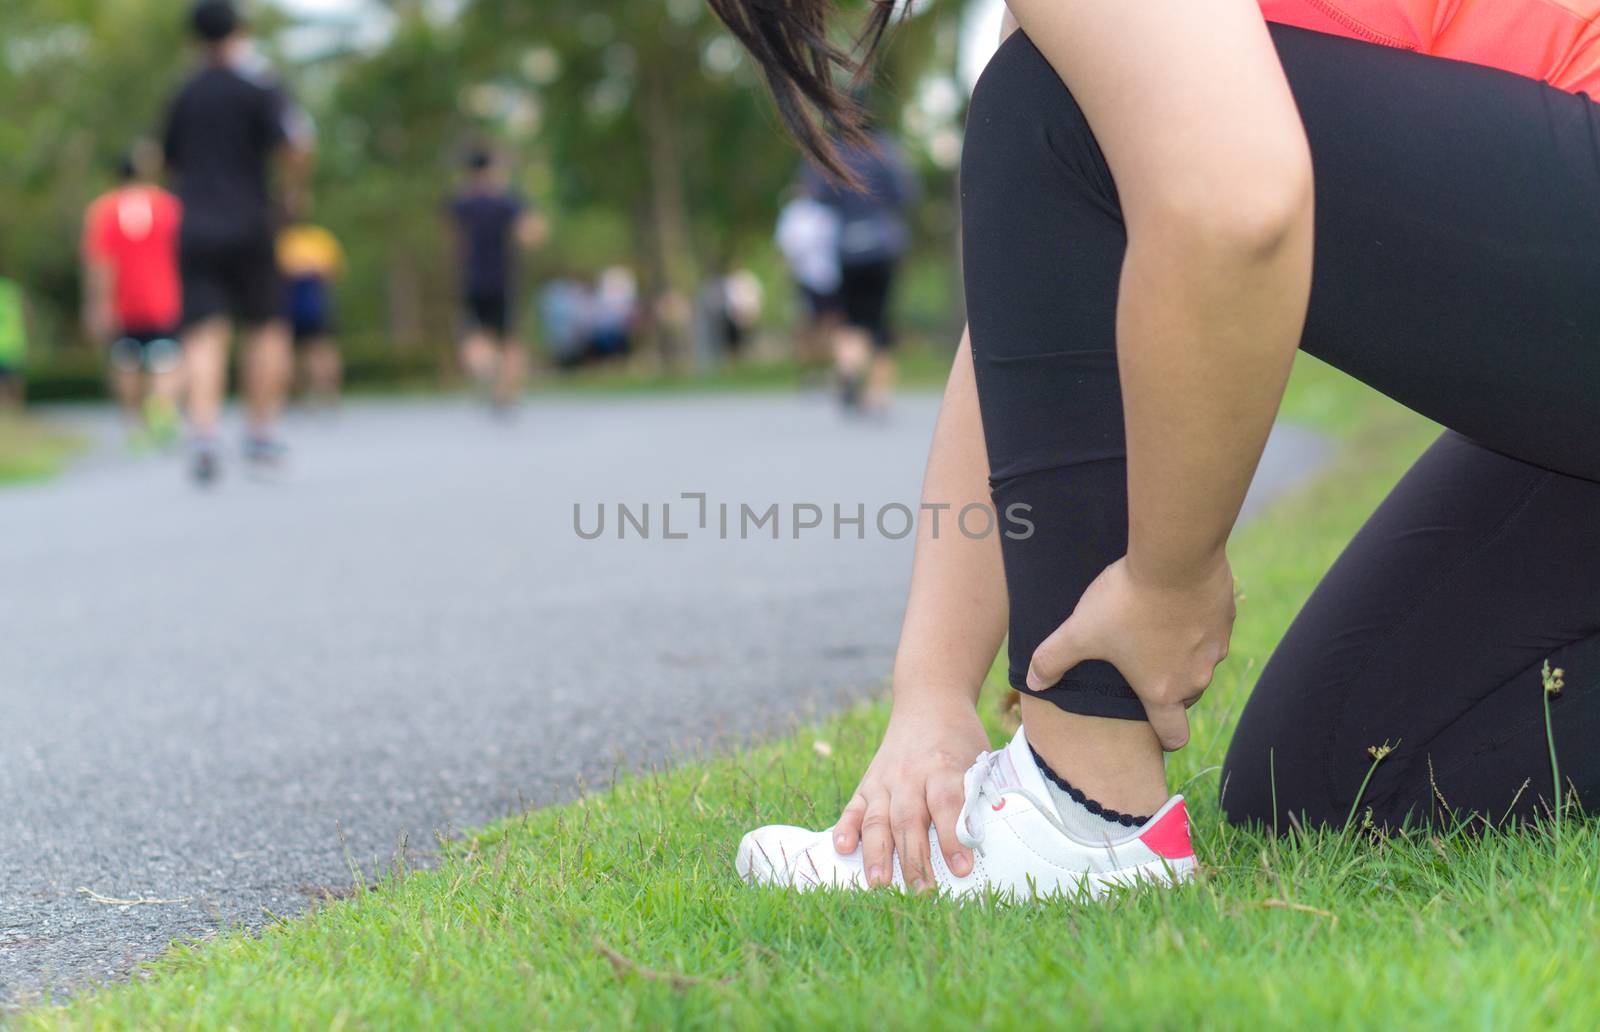 Ankle sprained. Young woman suffering from an ankle injury while jogging and running at the park. Healthcare and sport concept.